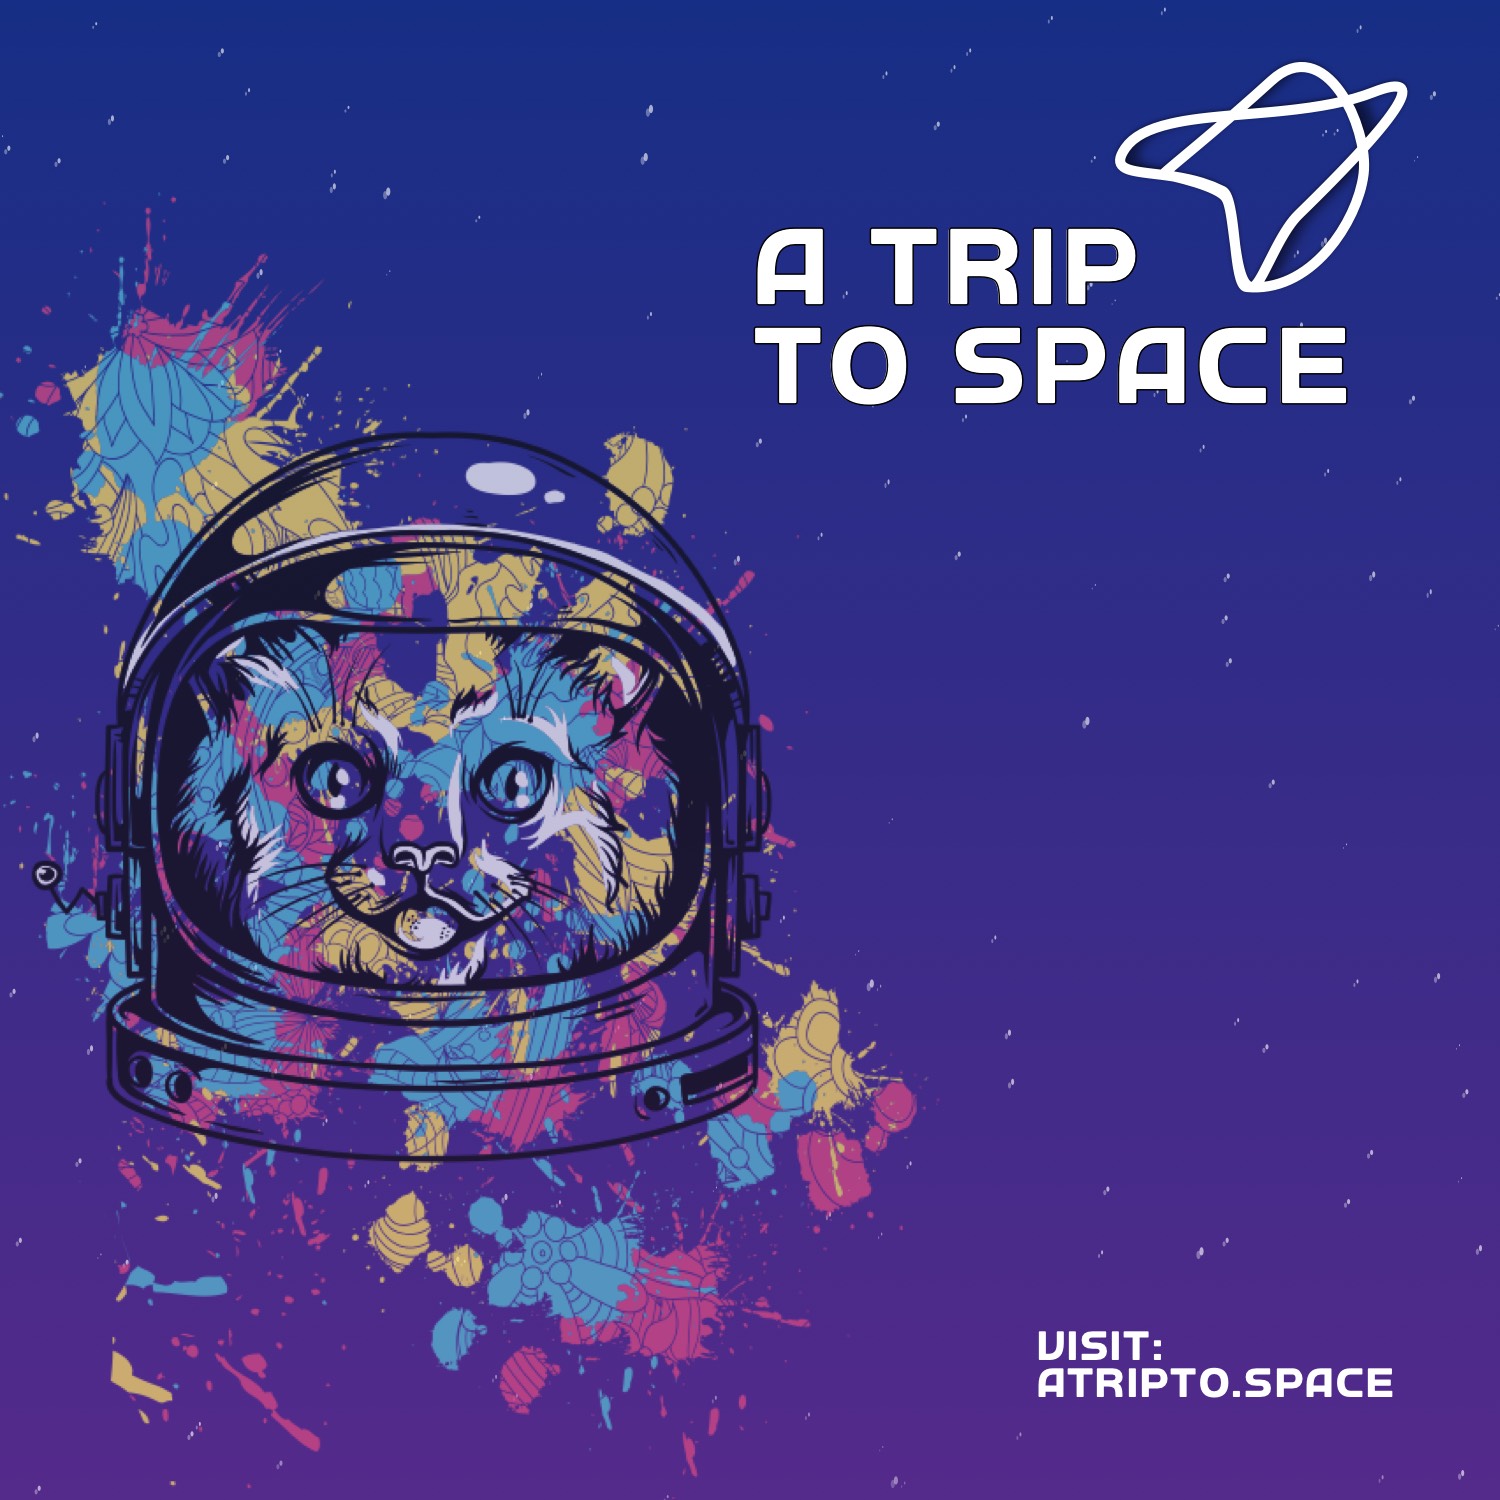 A Trip to Space